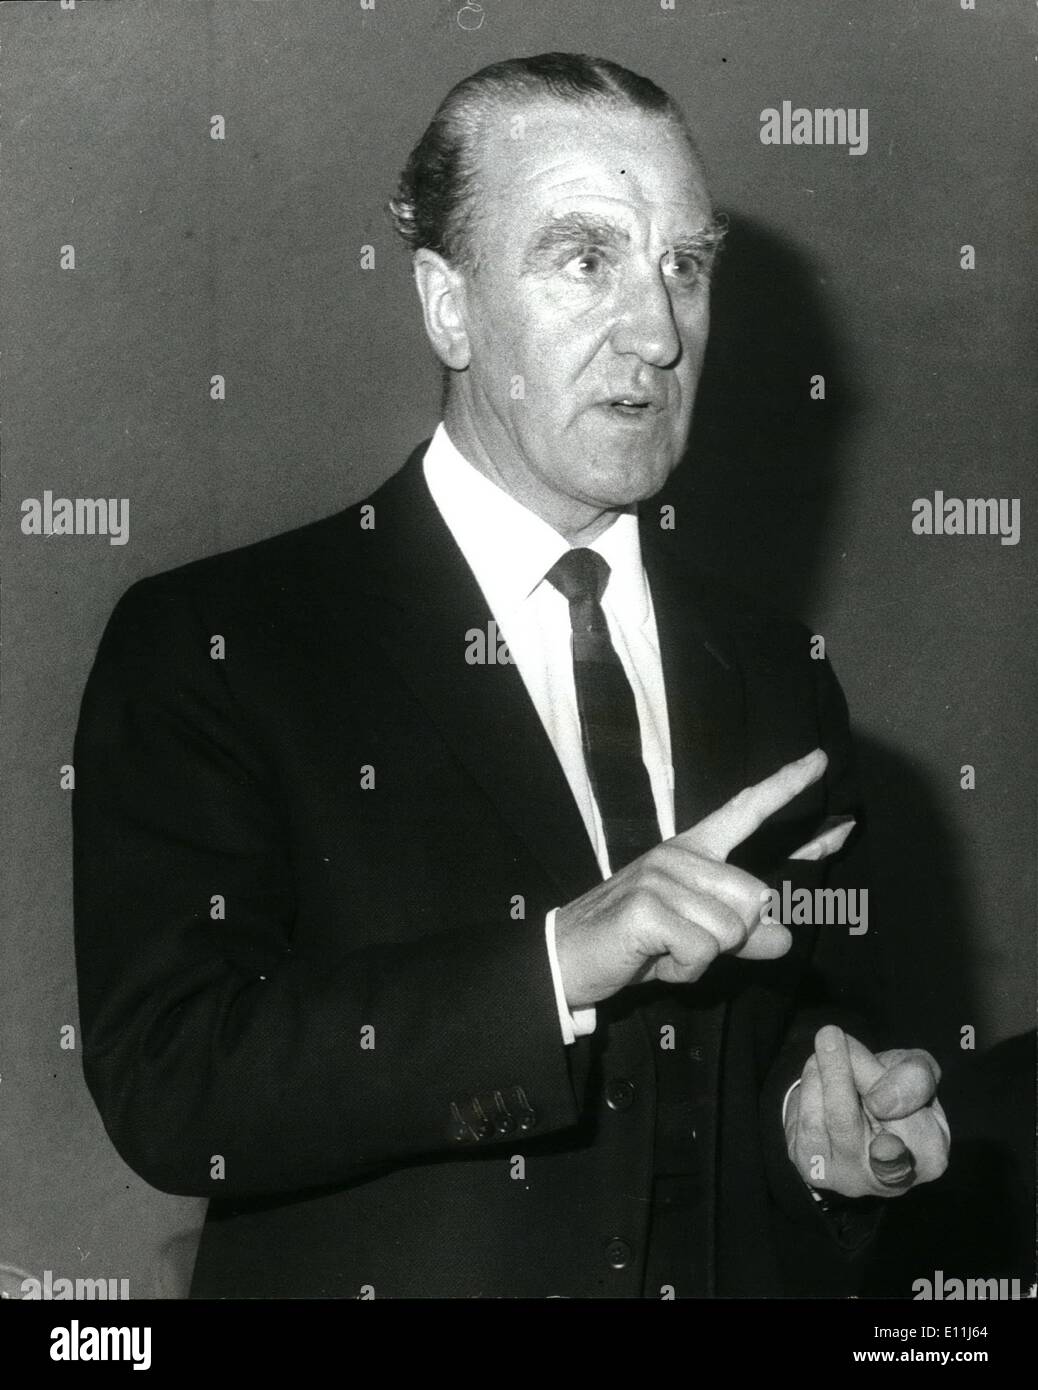 Jul. 07, 1978 - Lord Maples dies: Lord (Ernest) Marples , Tory MP for Wallasey 1945-74 and former Postmaster General and Minister of Transport, died today in the Princess Grace hospital, Monte Carlo. at the age of 70. Photo shows Ernest Marples who died today in Monte Carlo at the age of 70 Picture takin in 1963 when his was Minister of Transport. Stock Photo